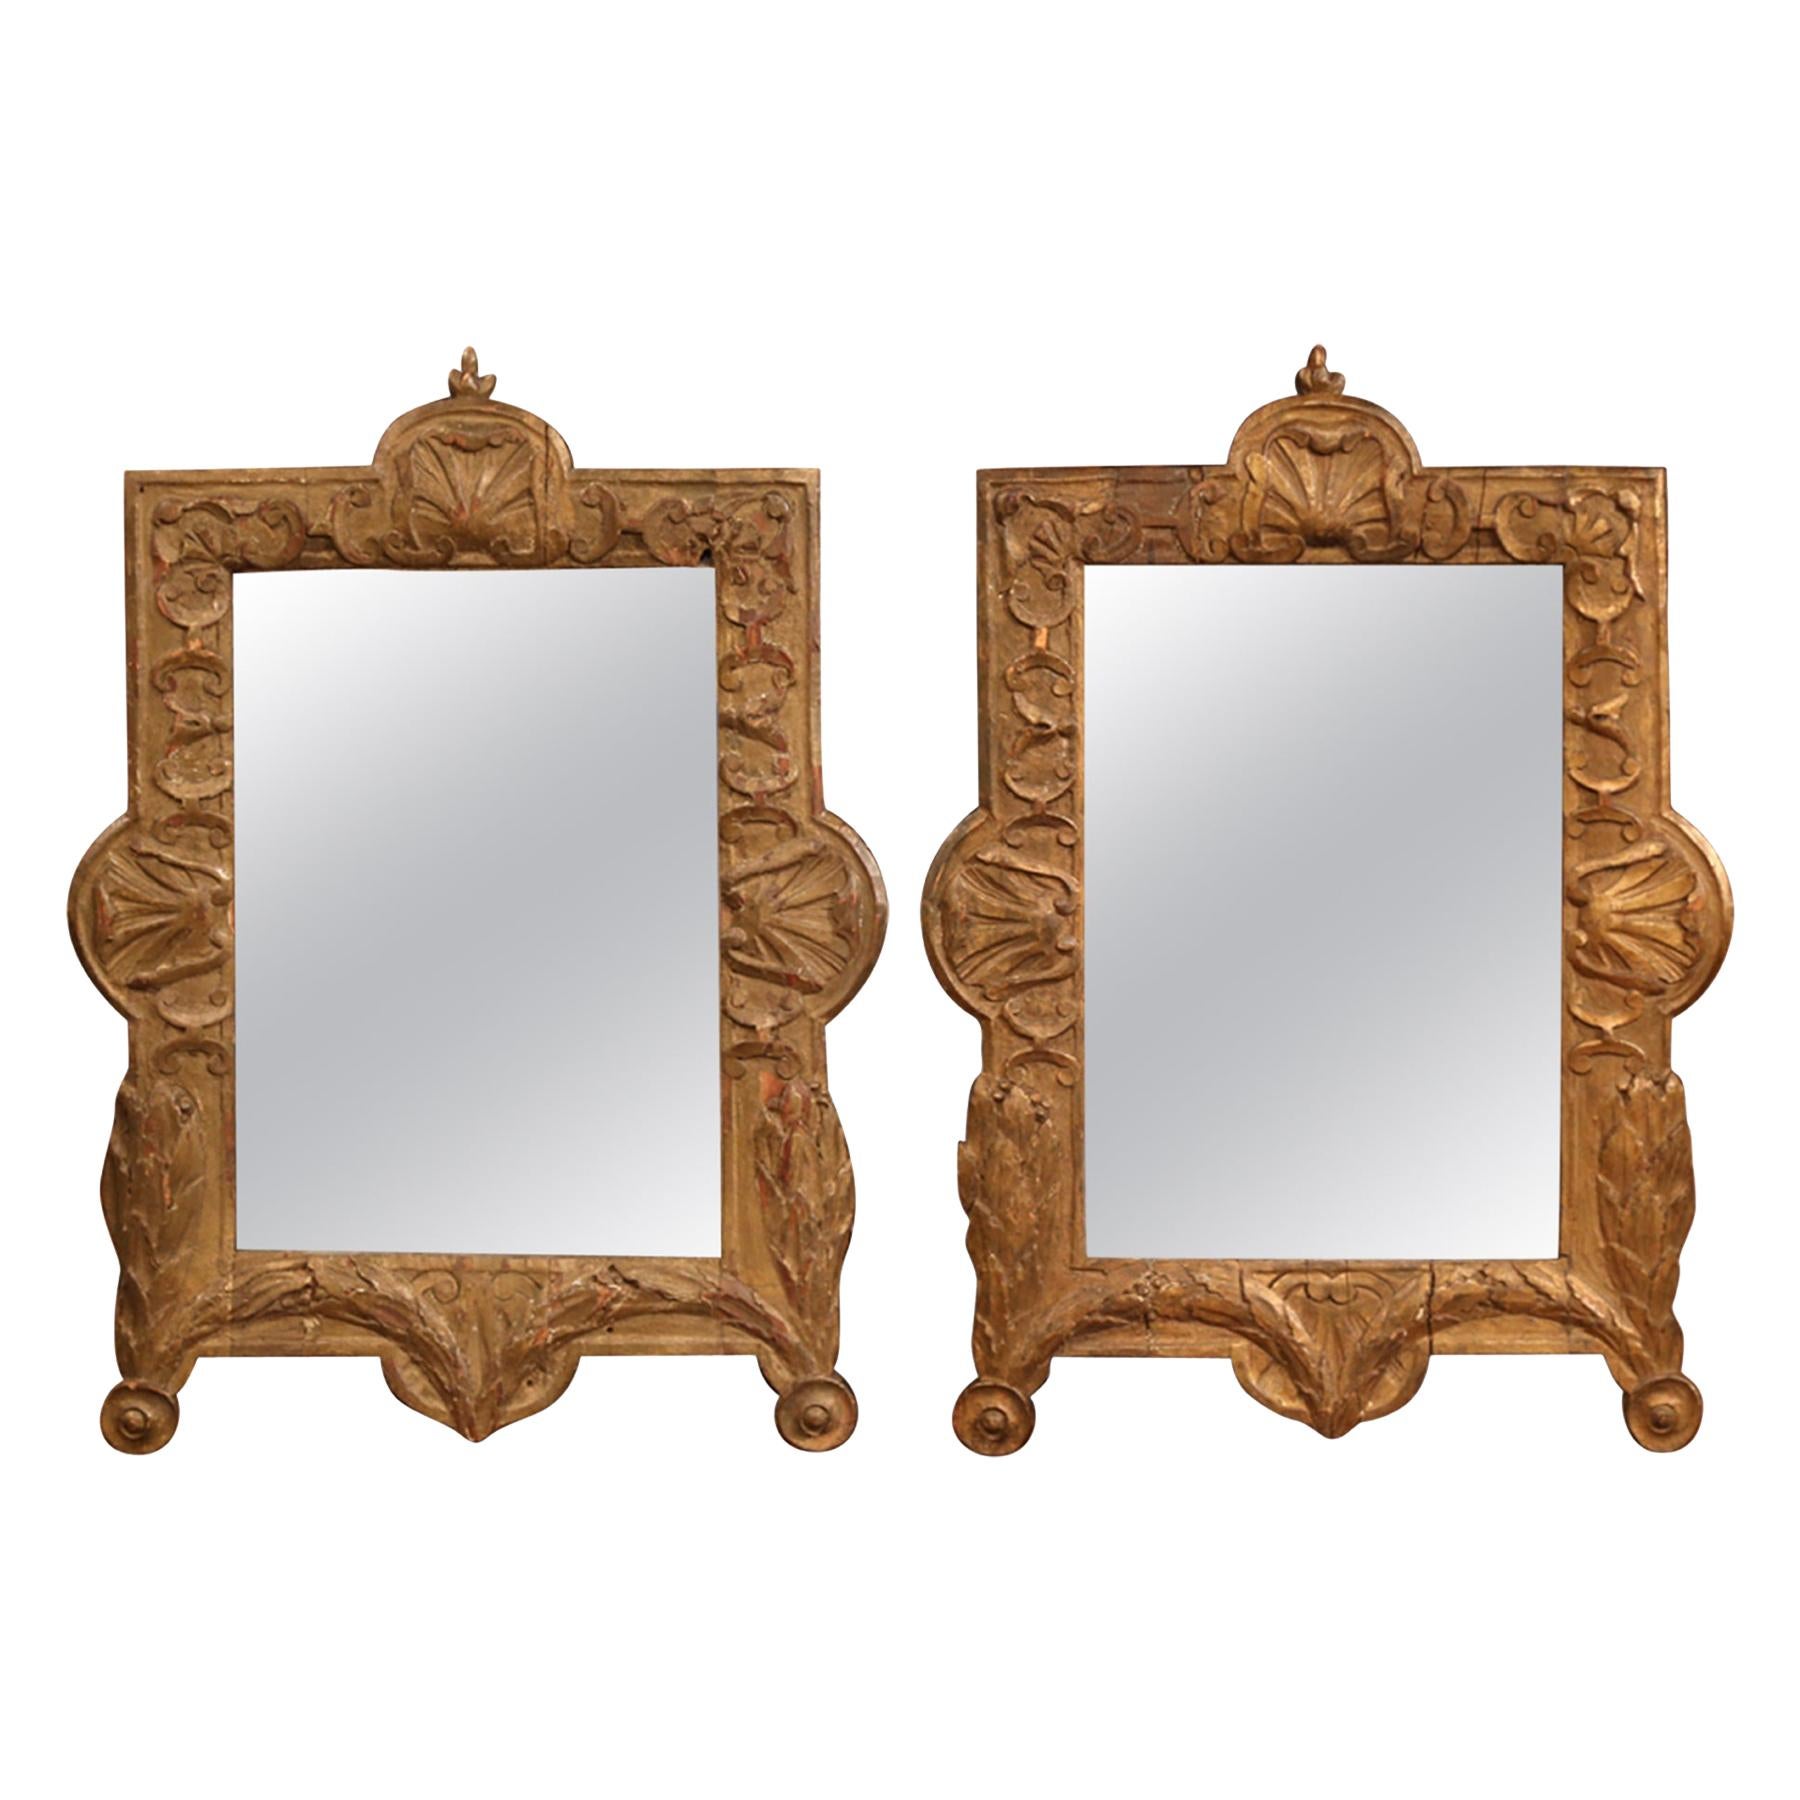 Pair of 18th Century French Carved Giltwood Wall Mirrors